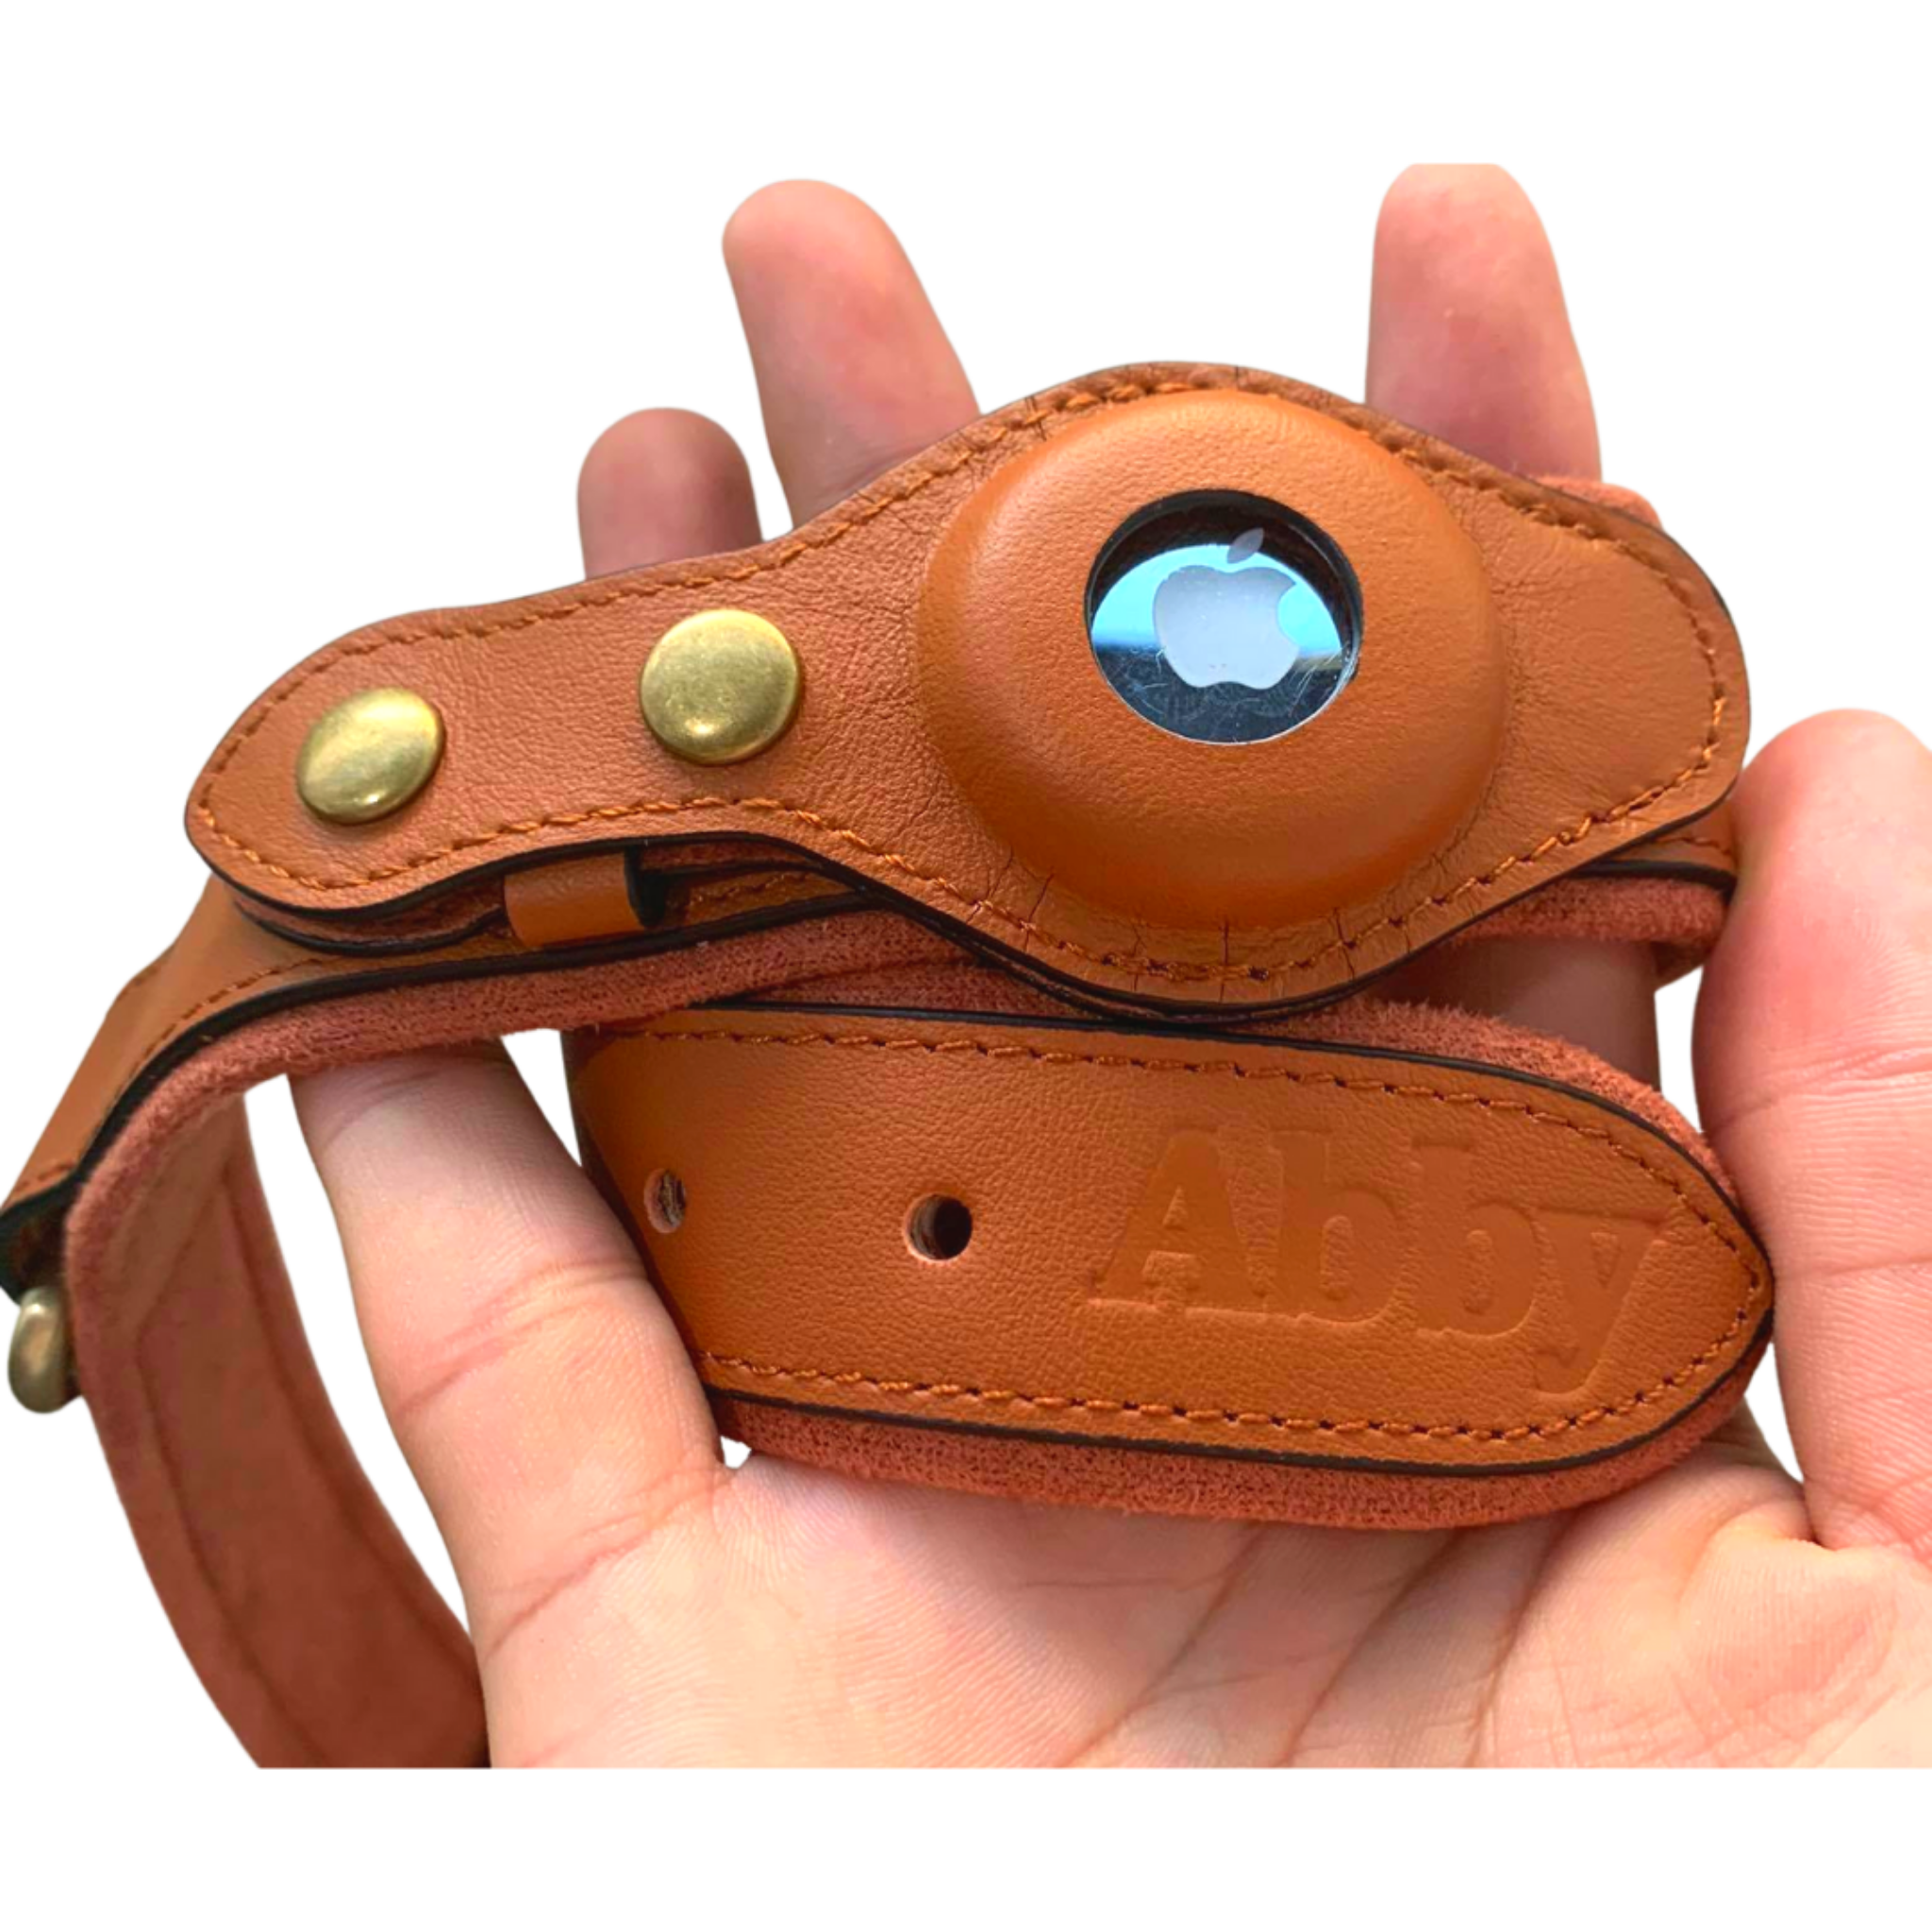 Abby’s Apple AirTag Dog Collar for your Pet, Leather - GPS Tracking - Abbycart